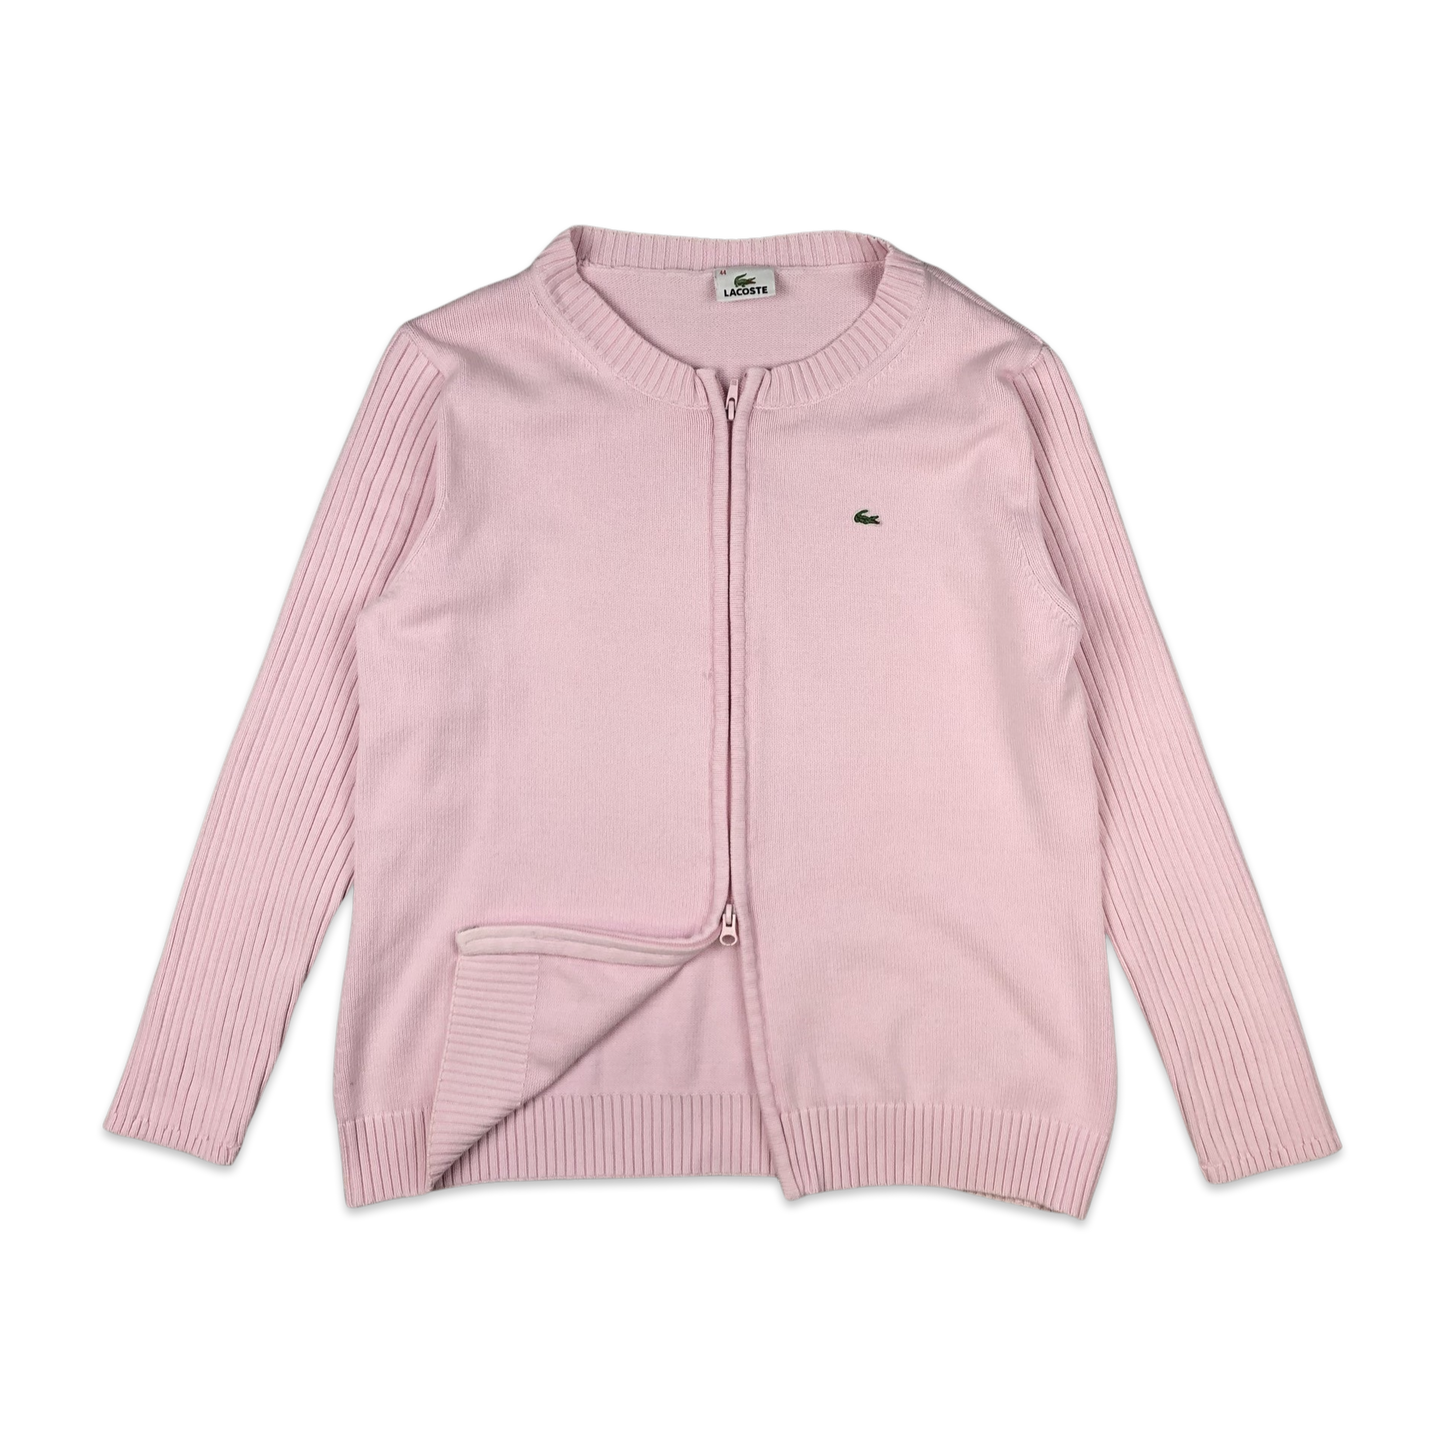 Lacoste Zip-up Knit Jumper Pink 14 16